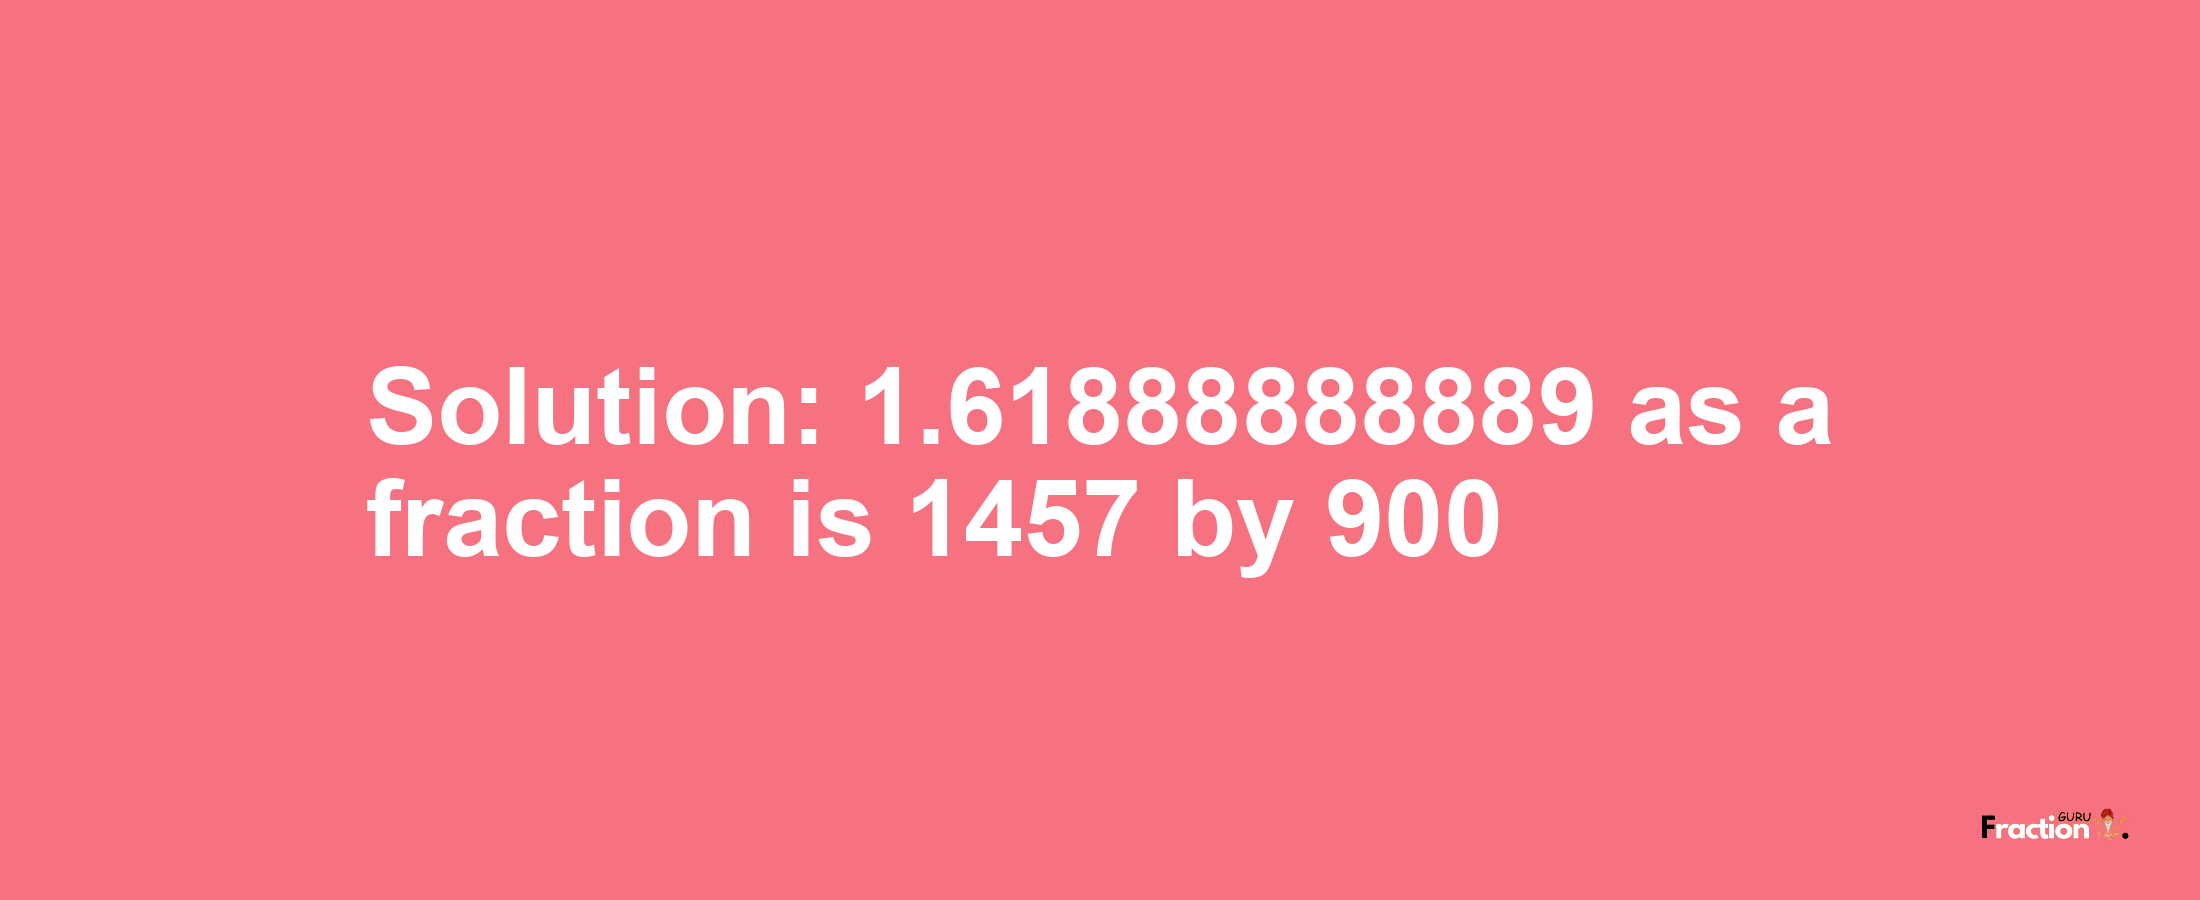 Solution:1.61888888889 as a fraction is 1457/900